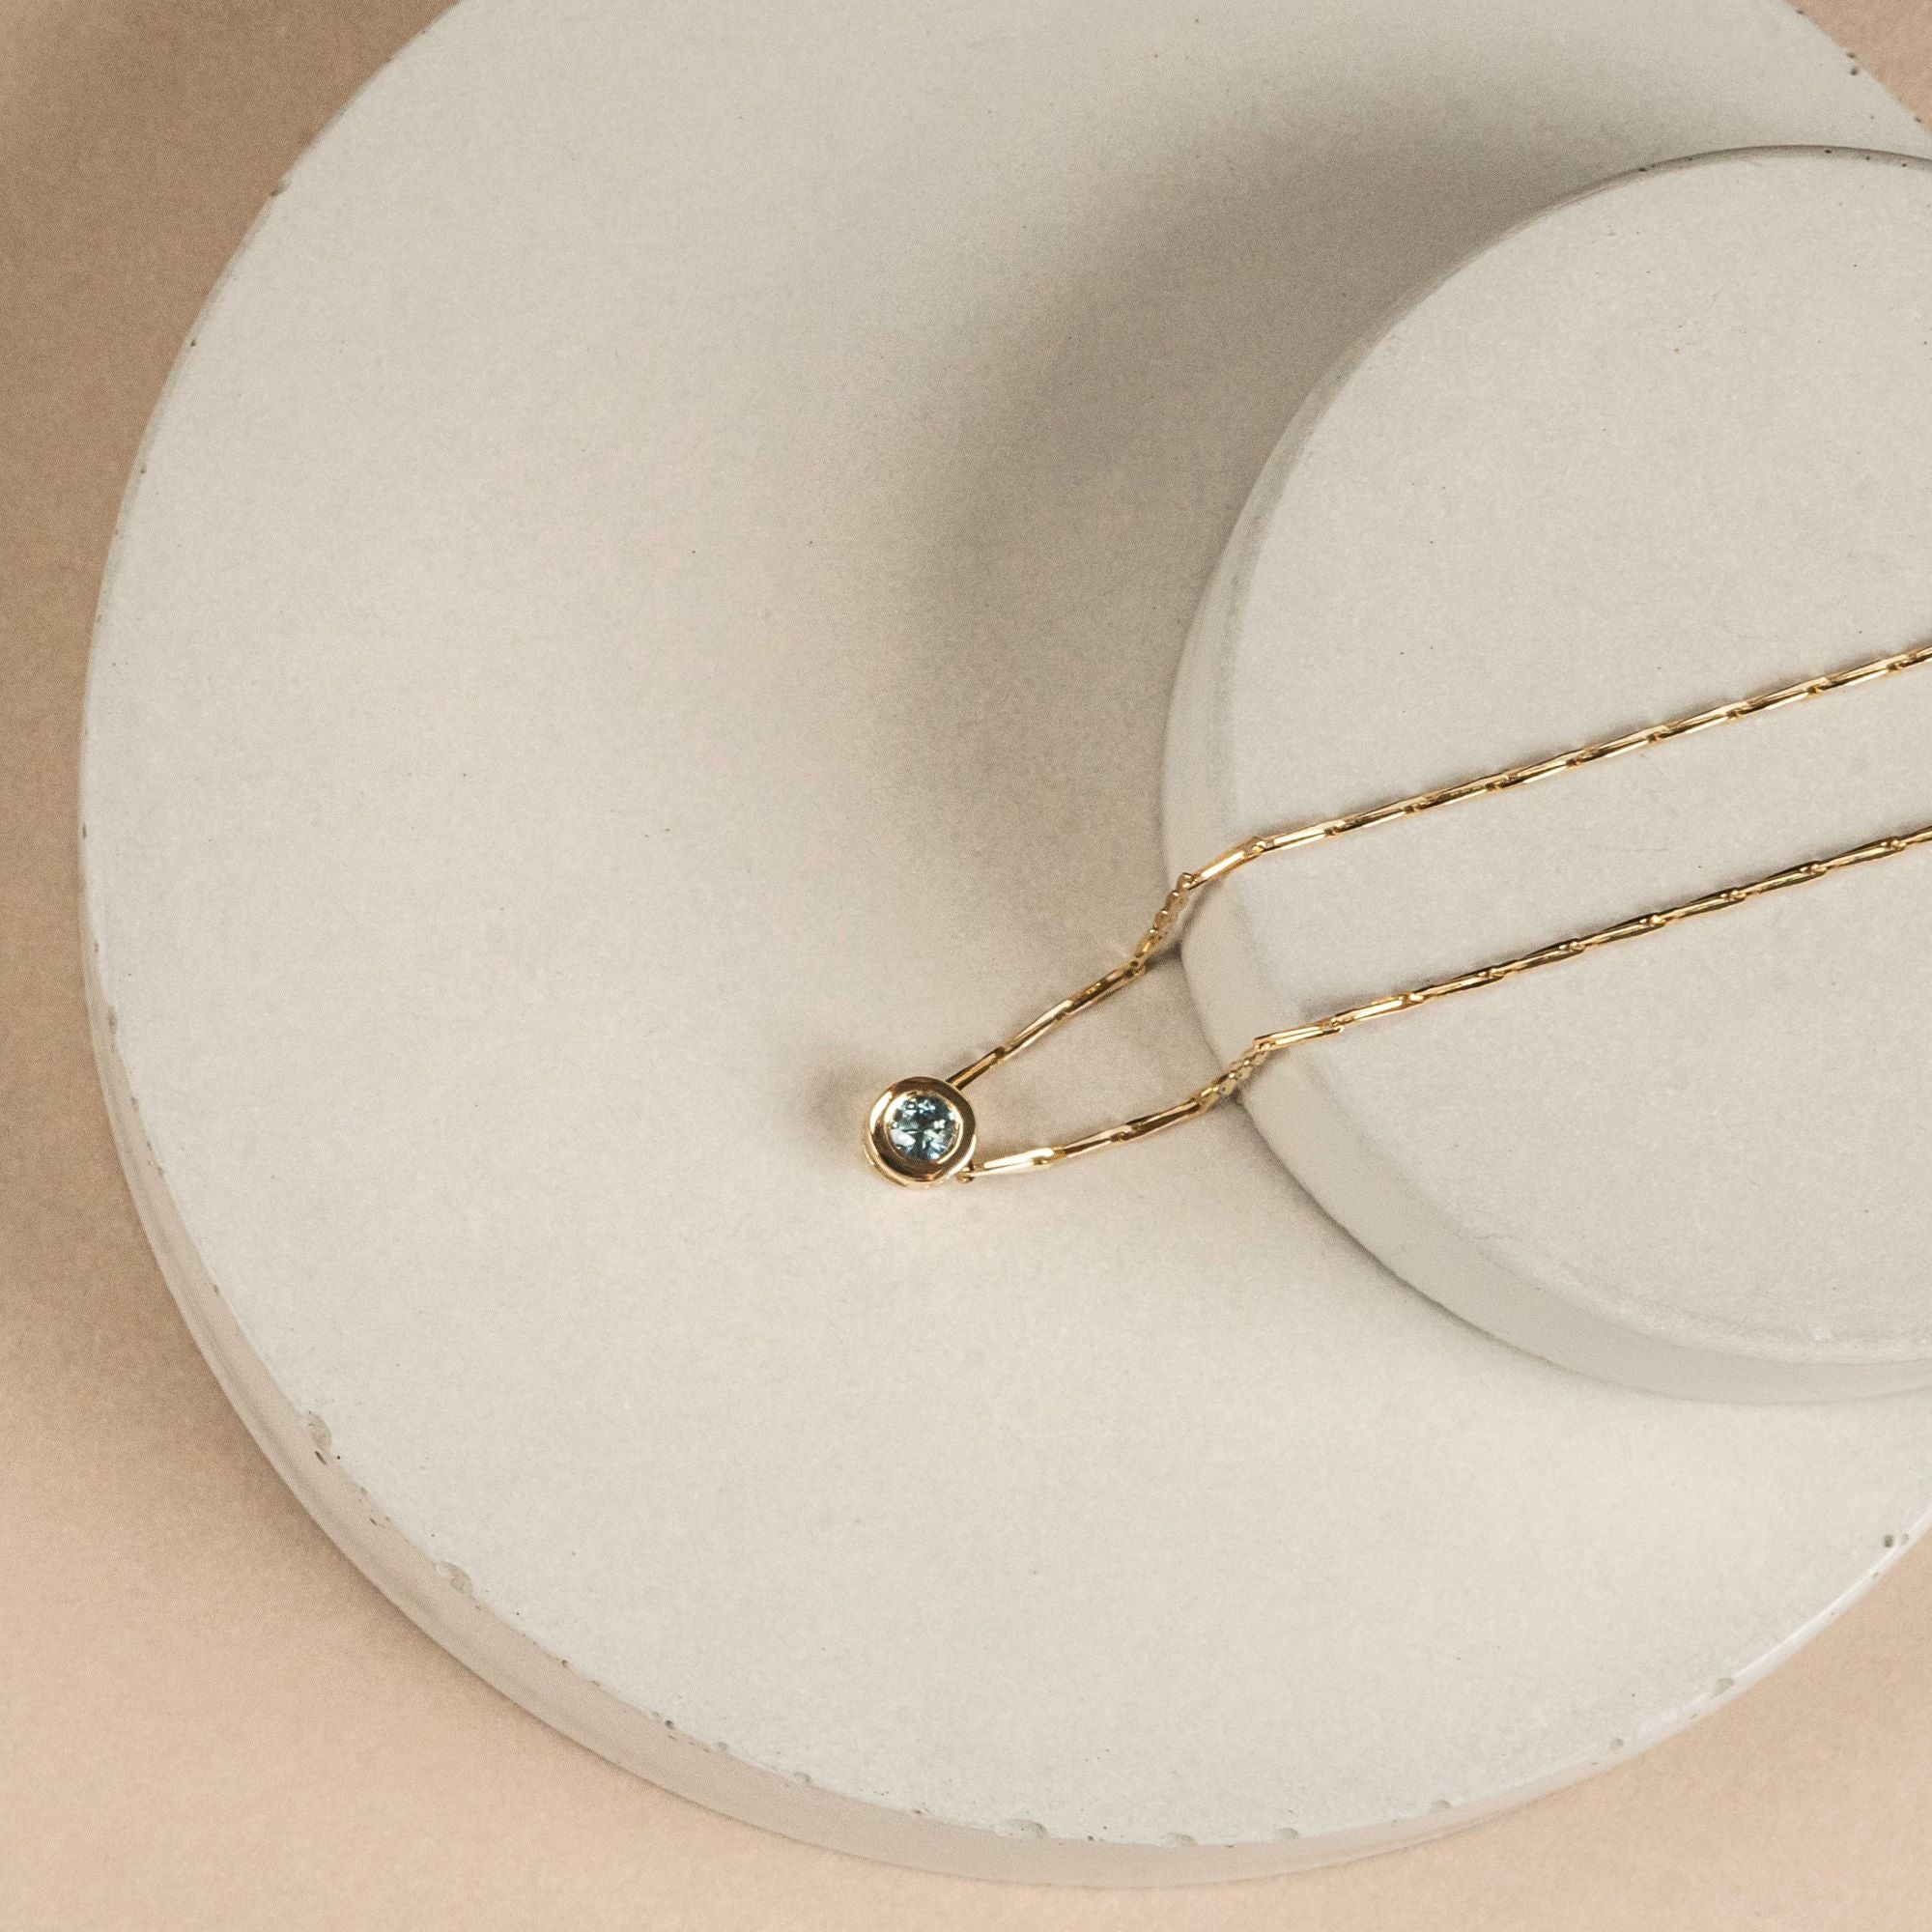 teal sapphire fairmined gold necklace